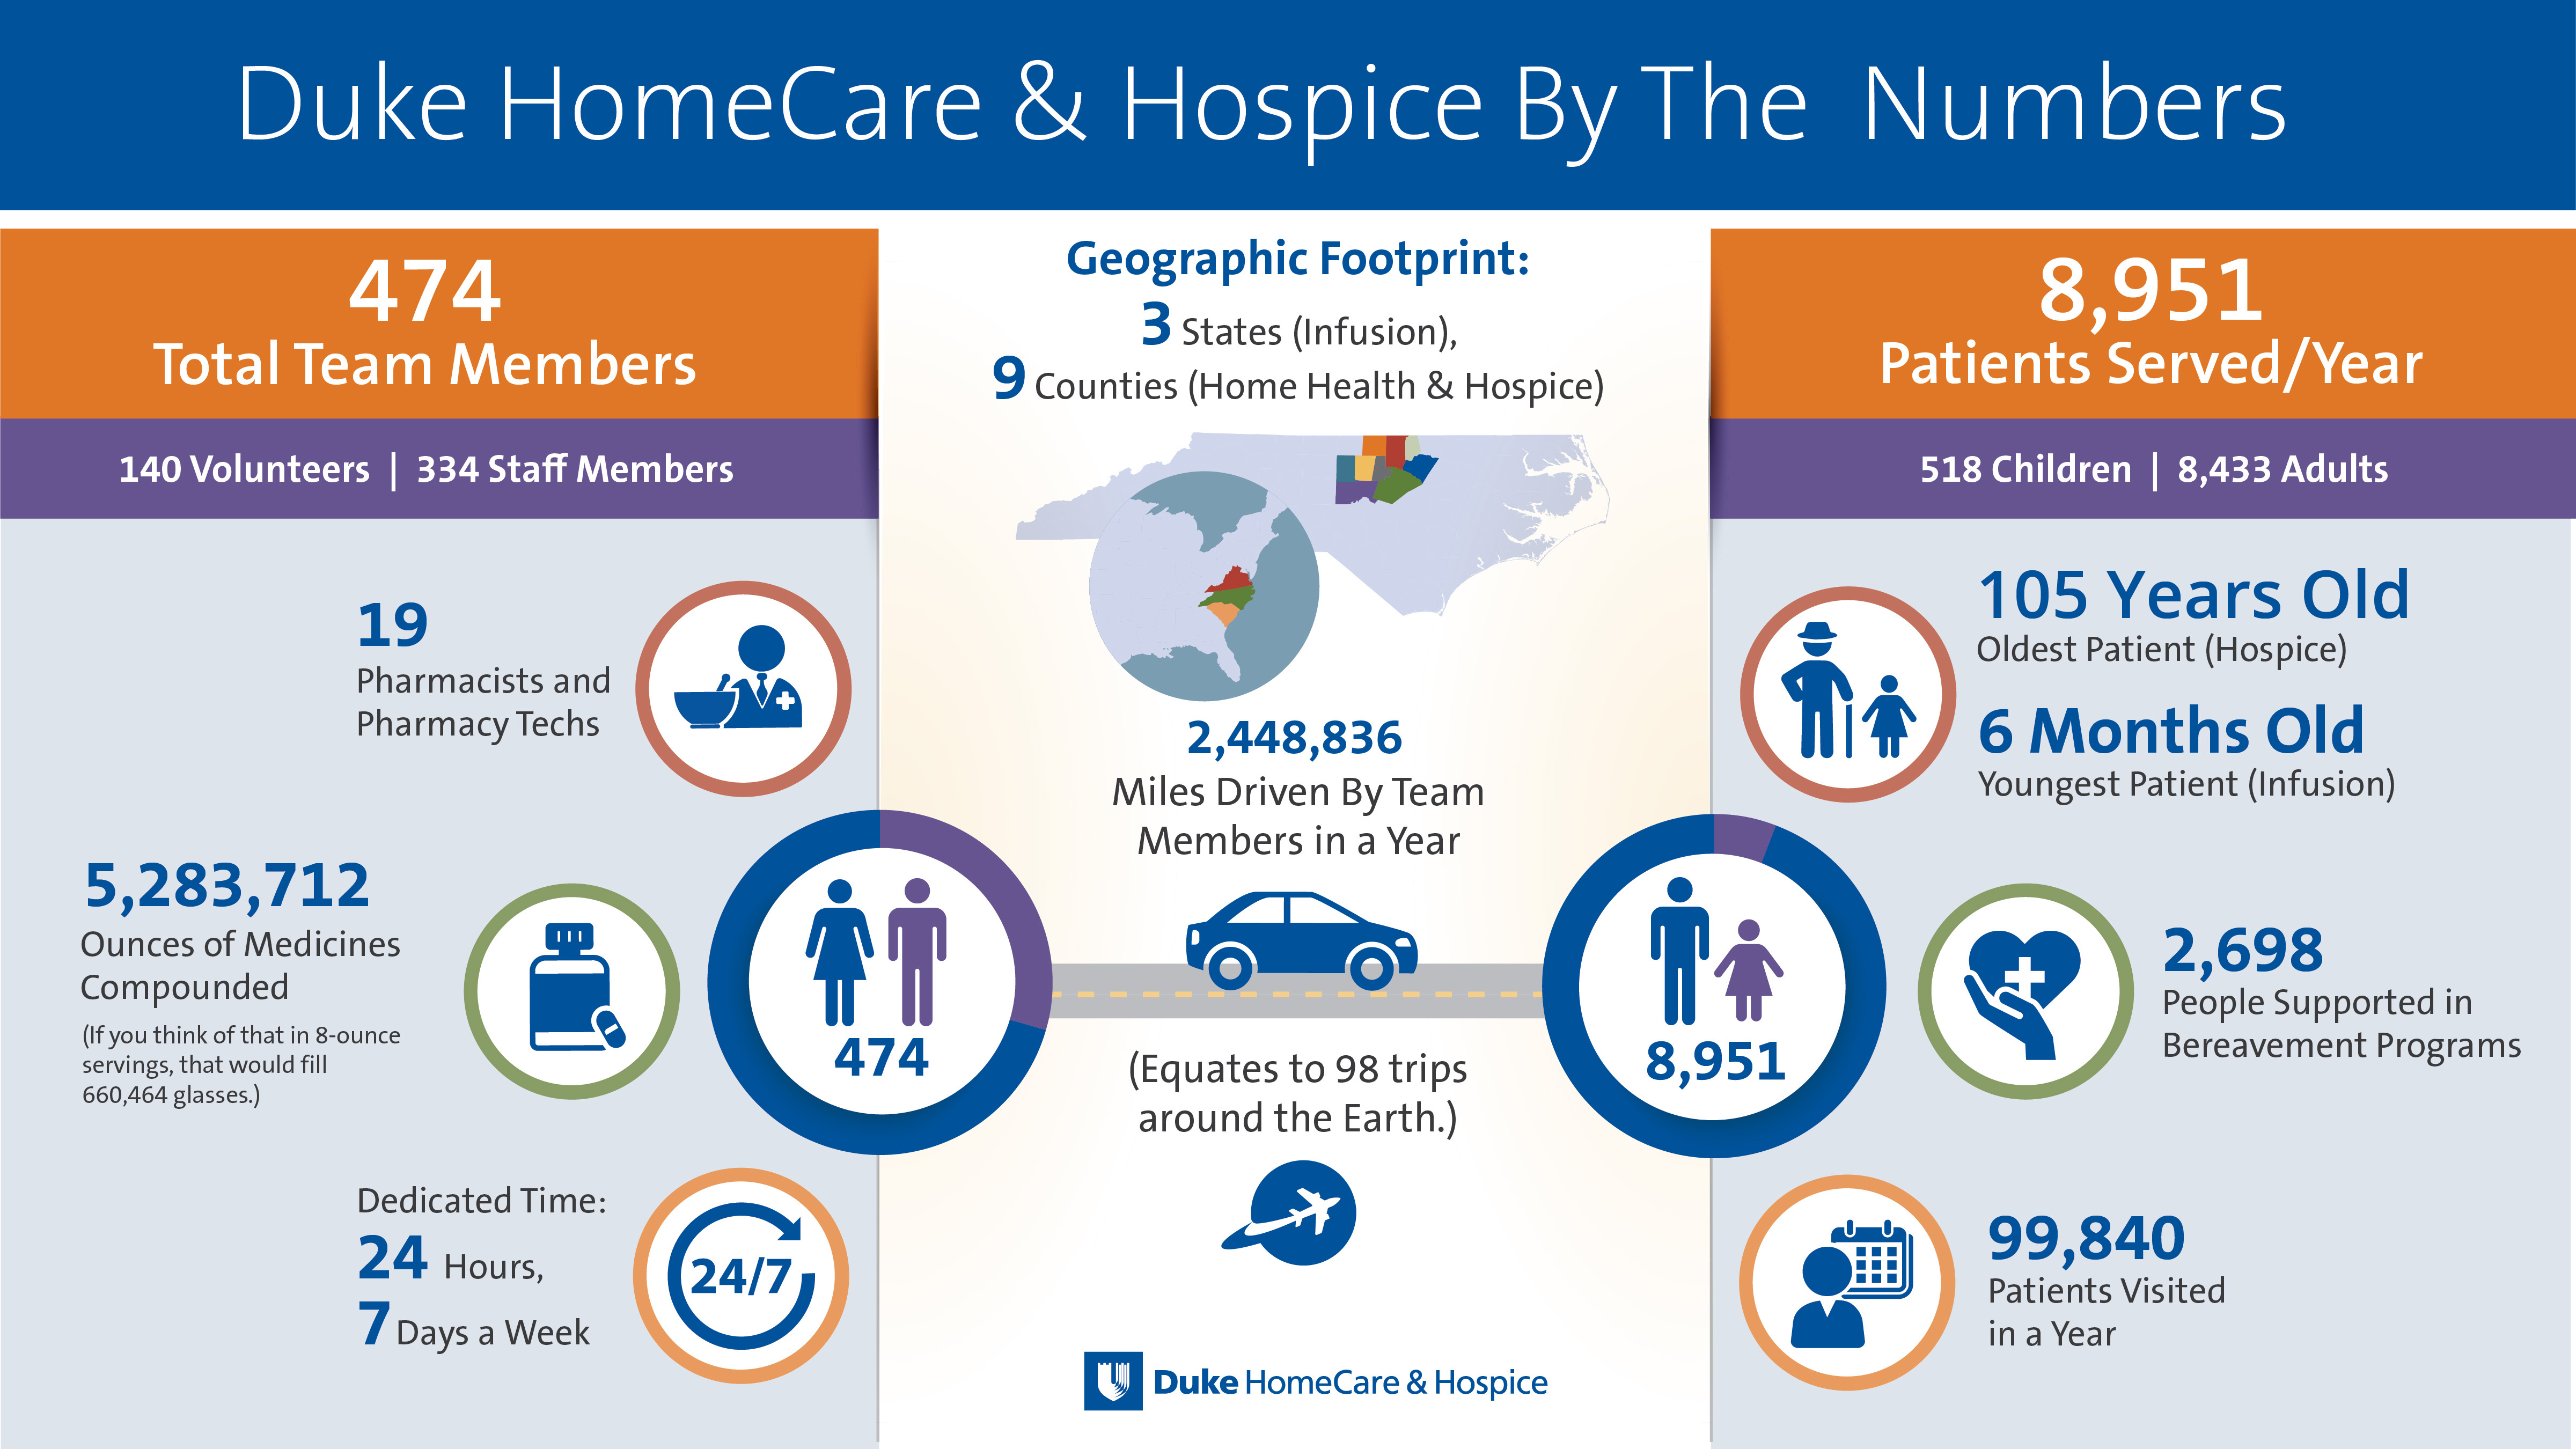 By the numbers, 474 total team members, 8951 patients server yearly